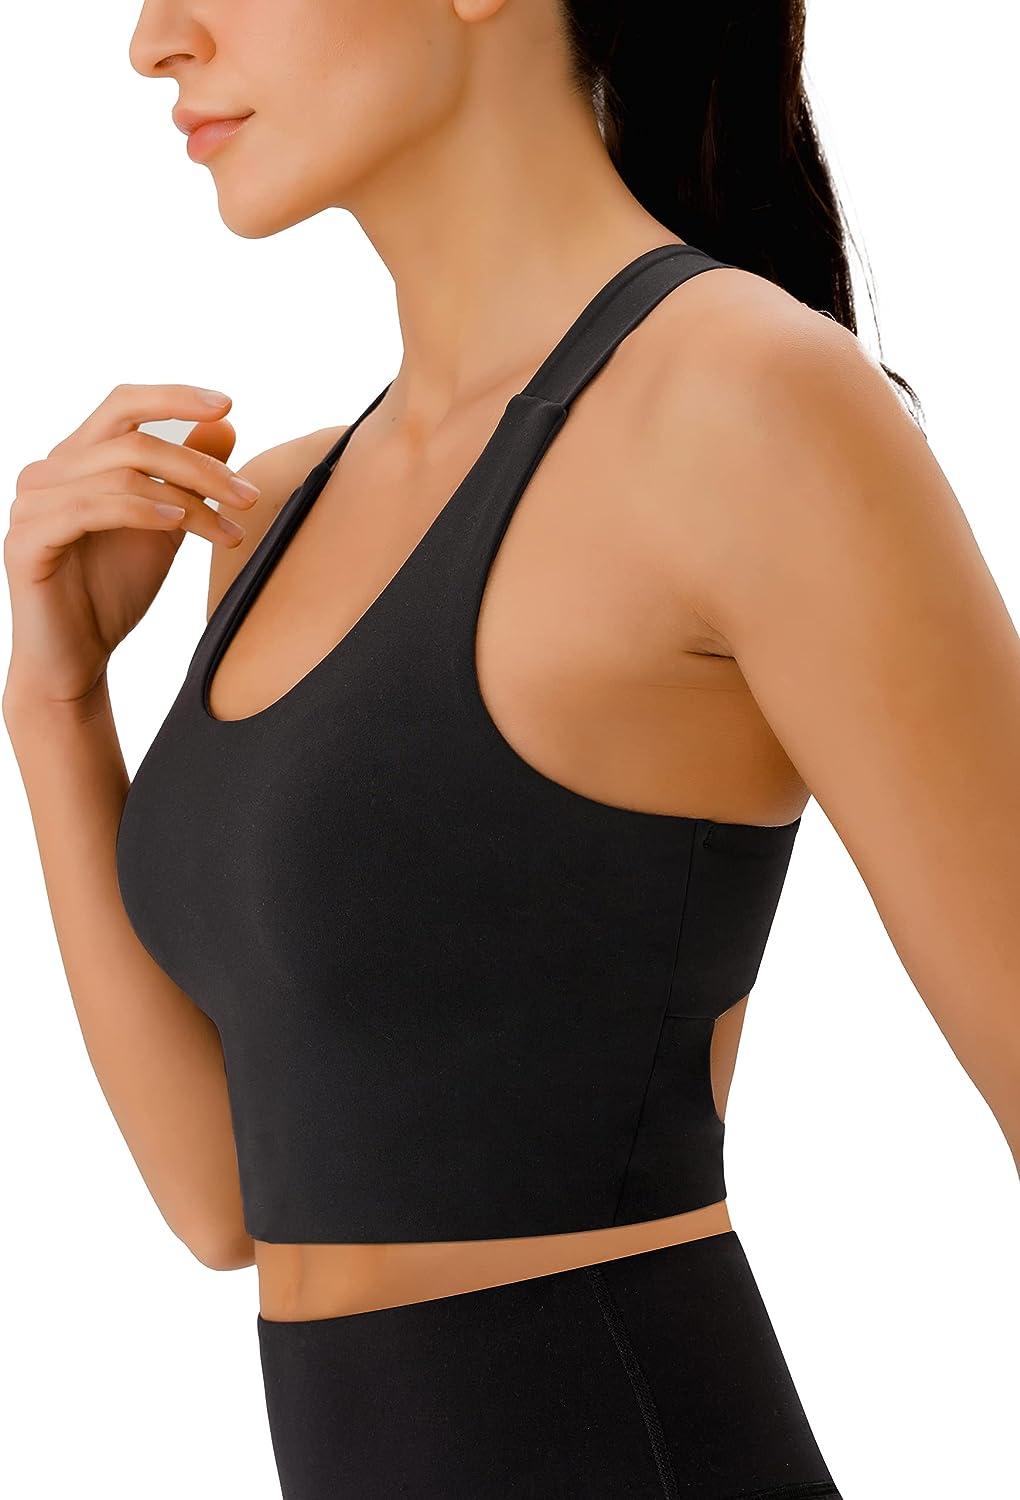 Crop Top Workout Tank Tops Sports Bras for Women Padded Tank Tops